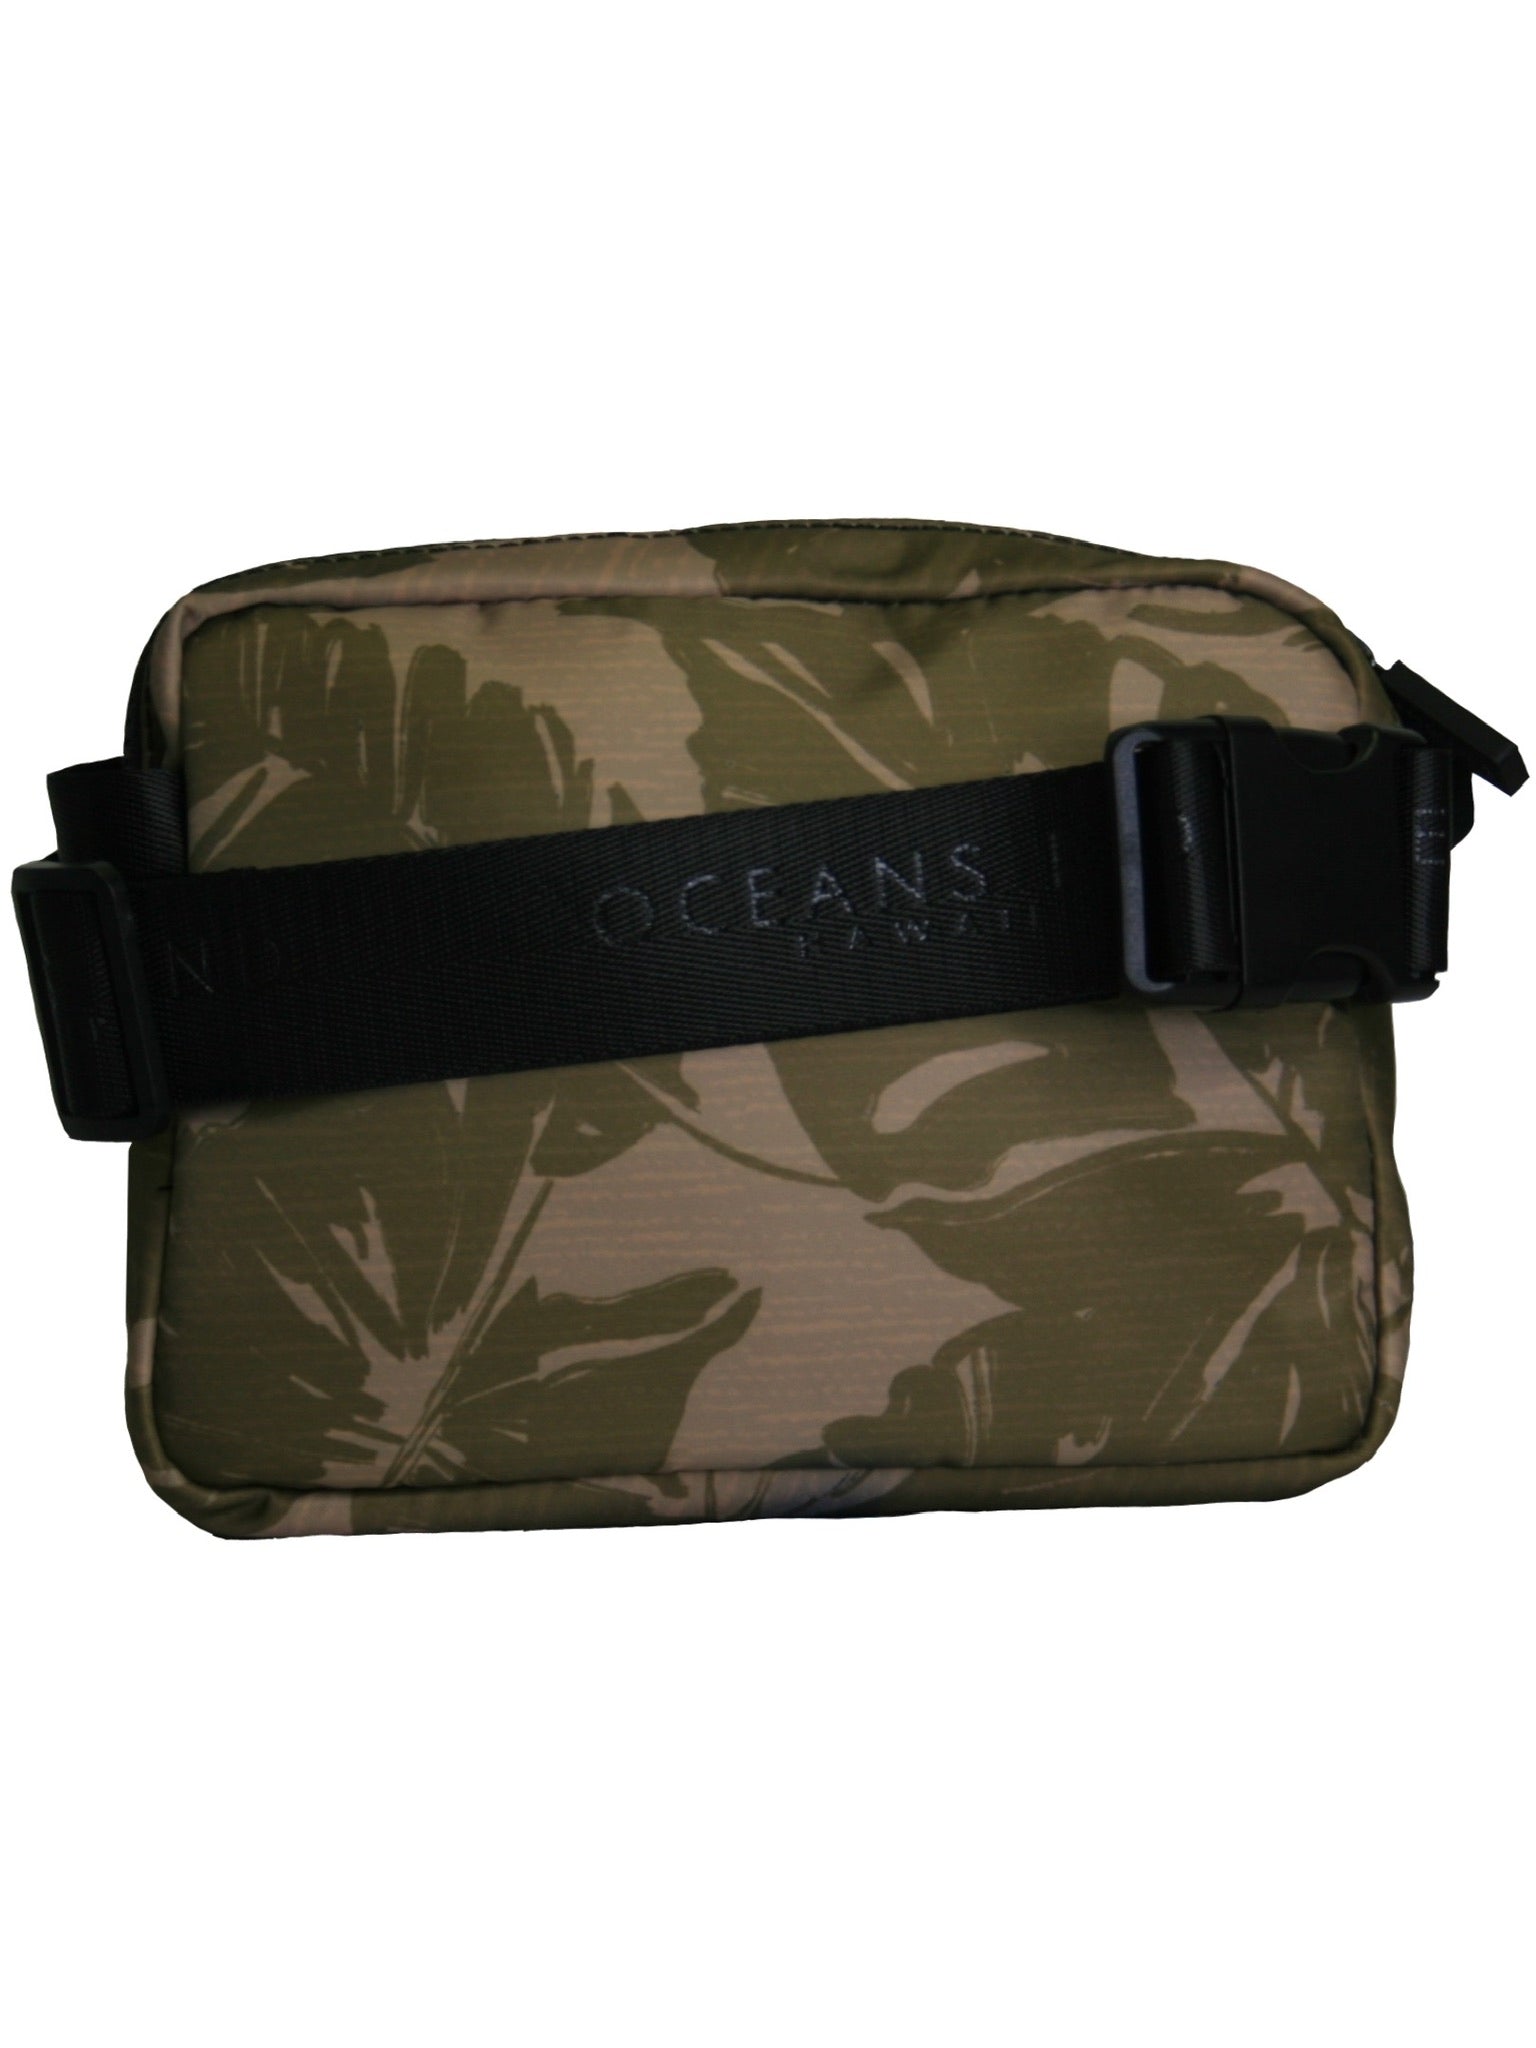 back of camo colored tropical foliage fanny or hip pack with black strap - Oceans End